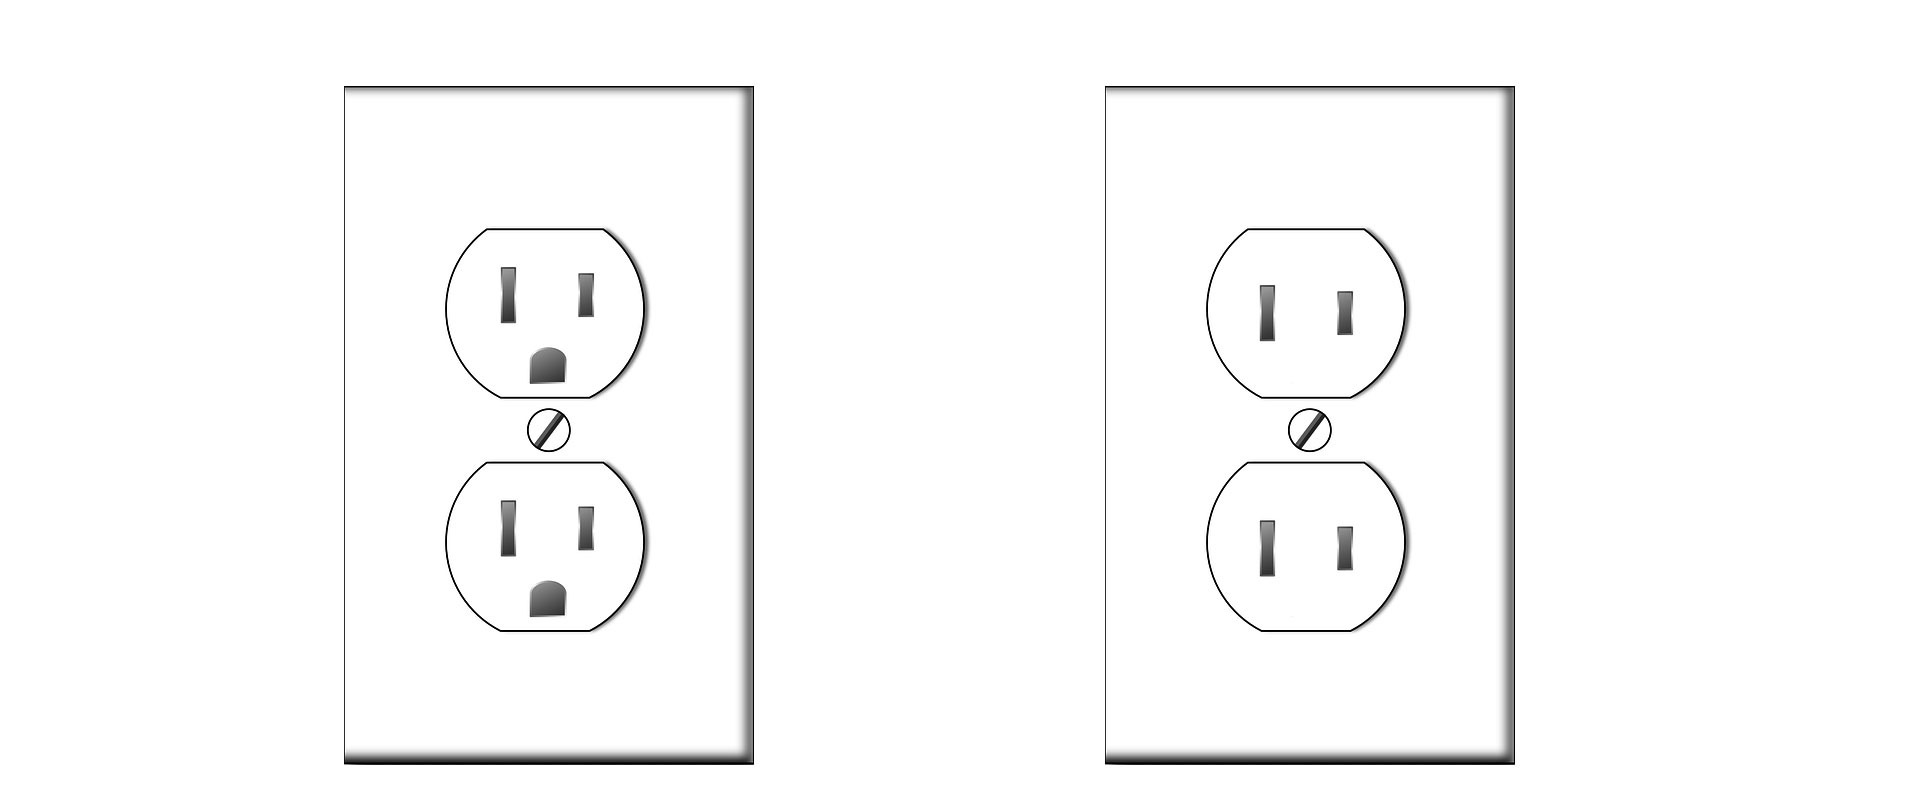 Japanese power outlets